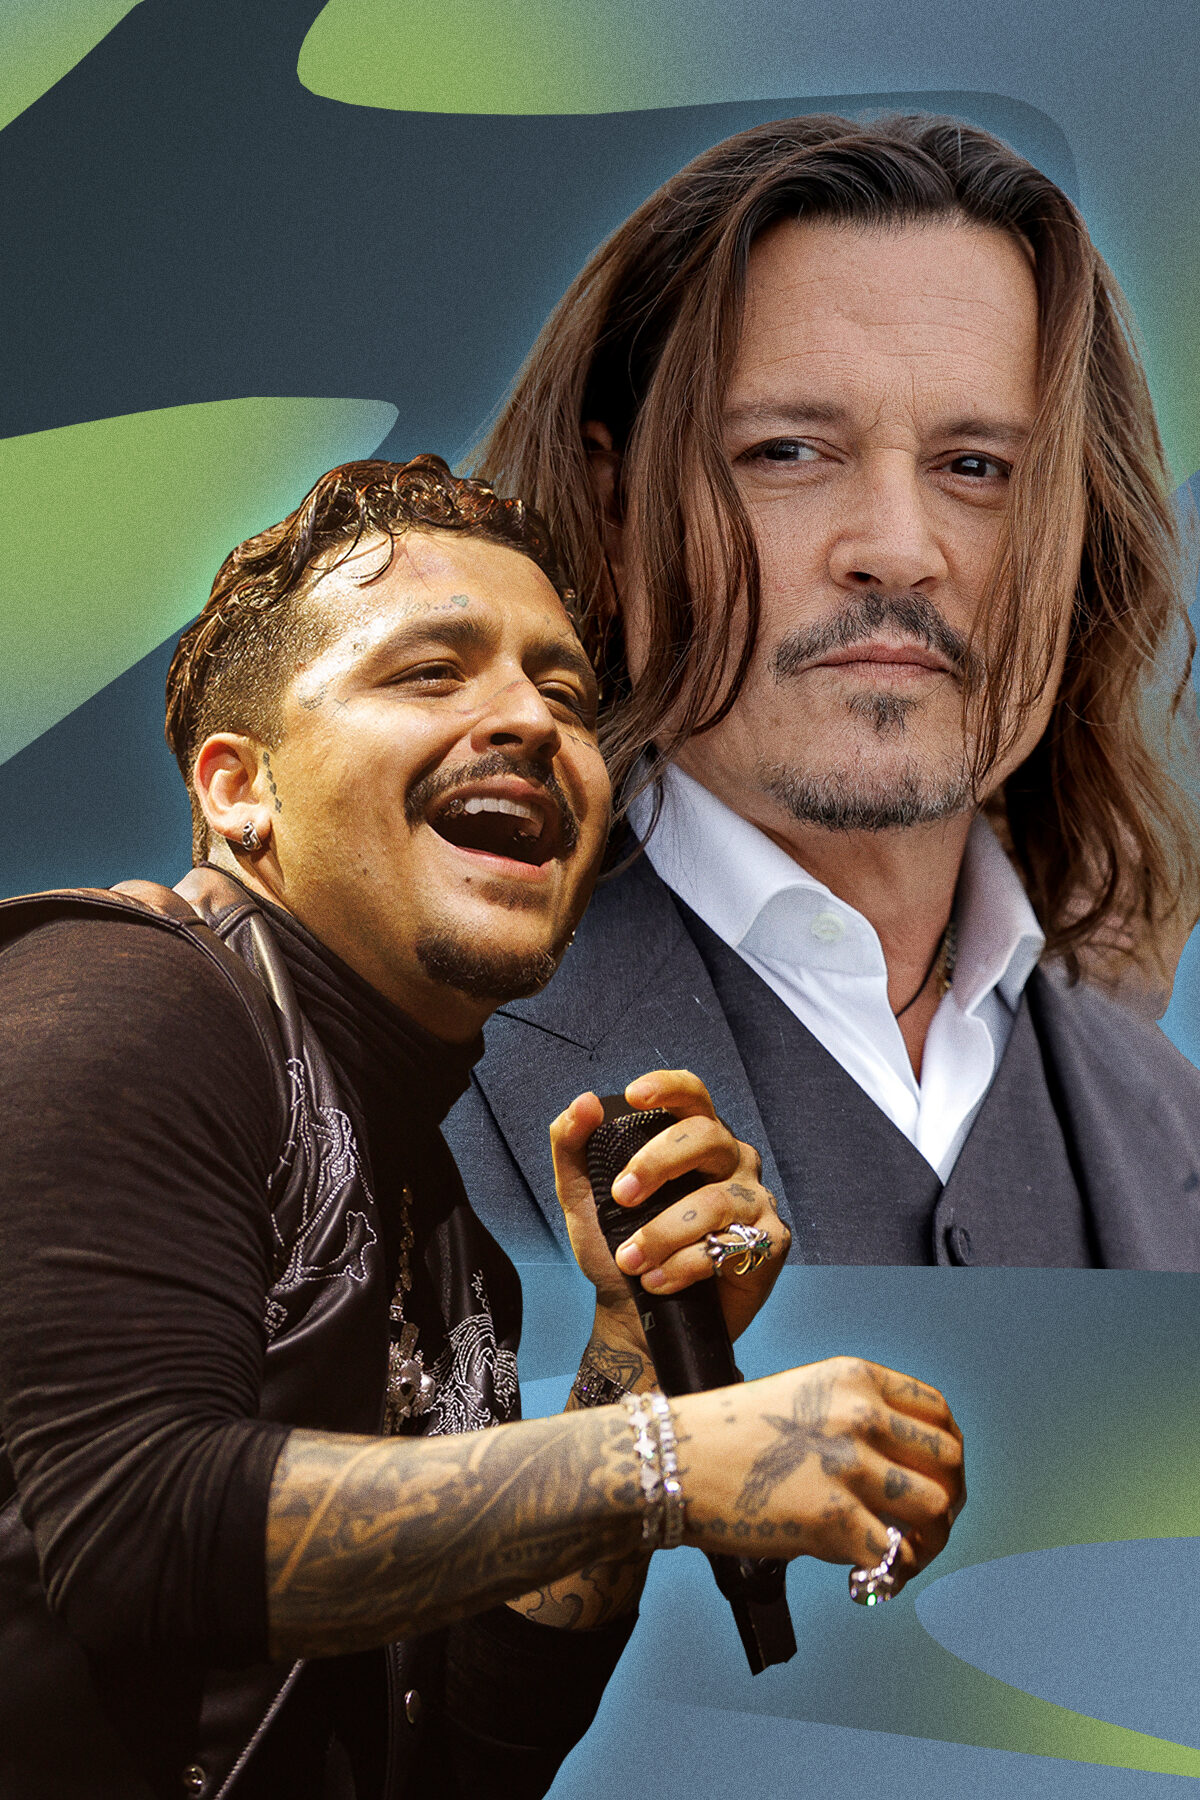 Christian Nodal and Johnny Depp in collage